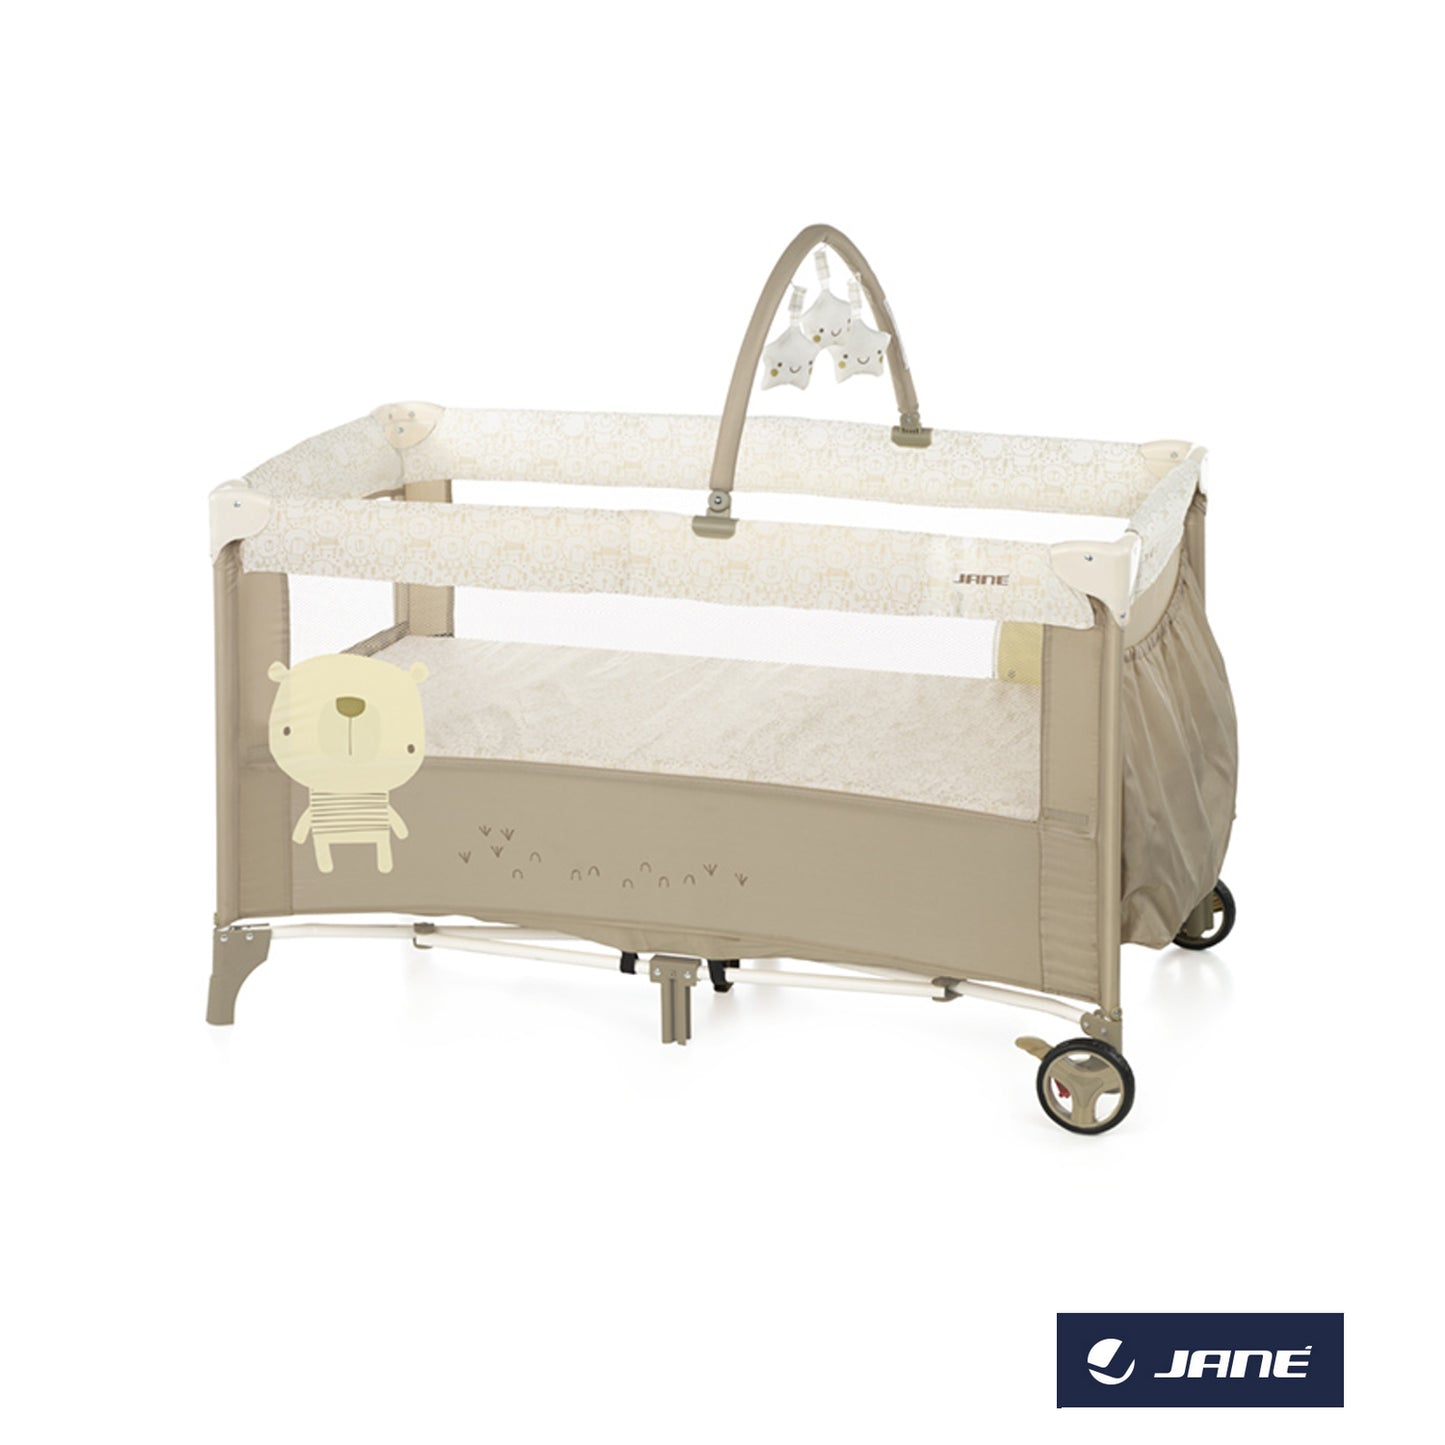 Janè - Camping Cot with Game and Double Height Duo Level Toys